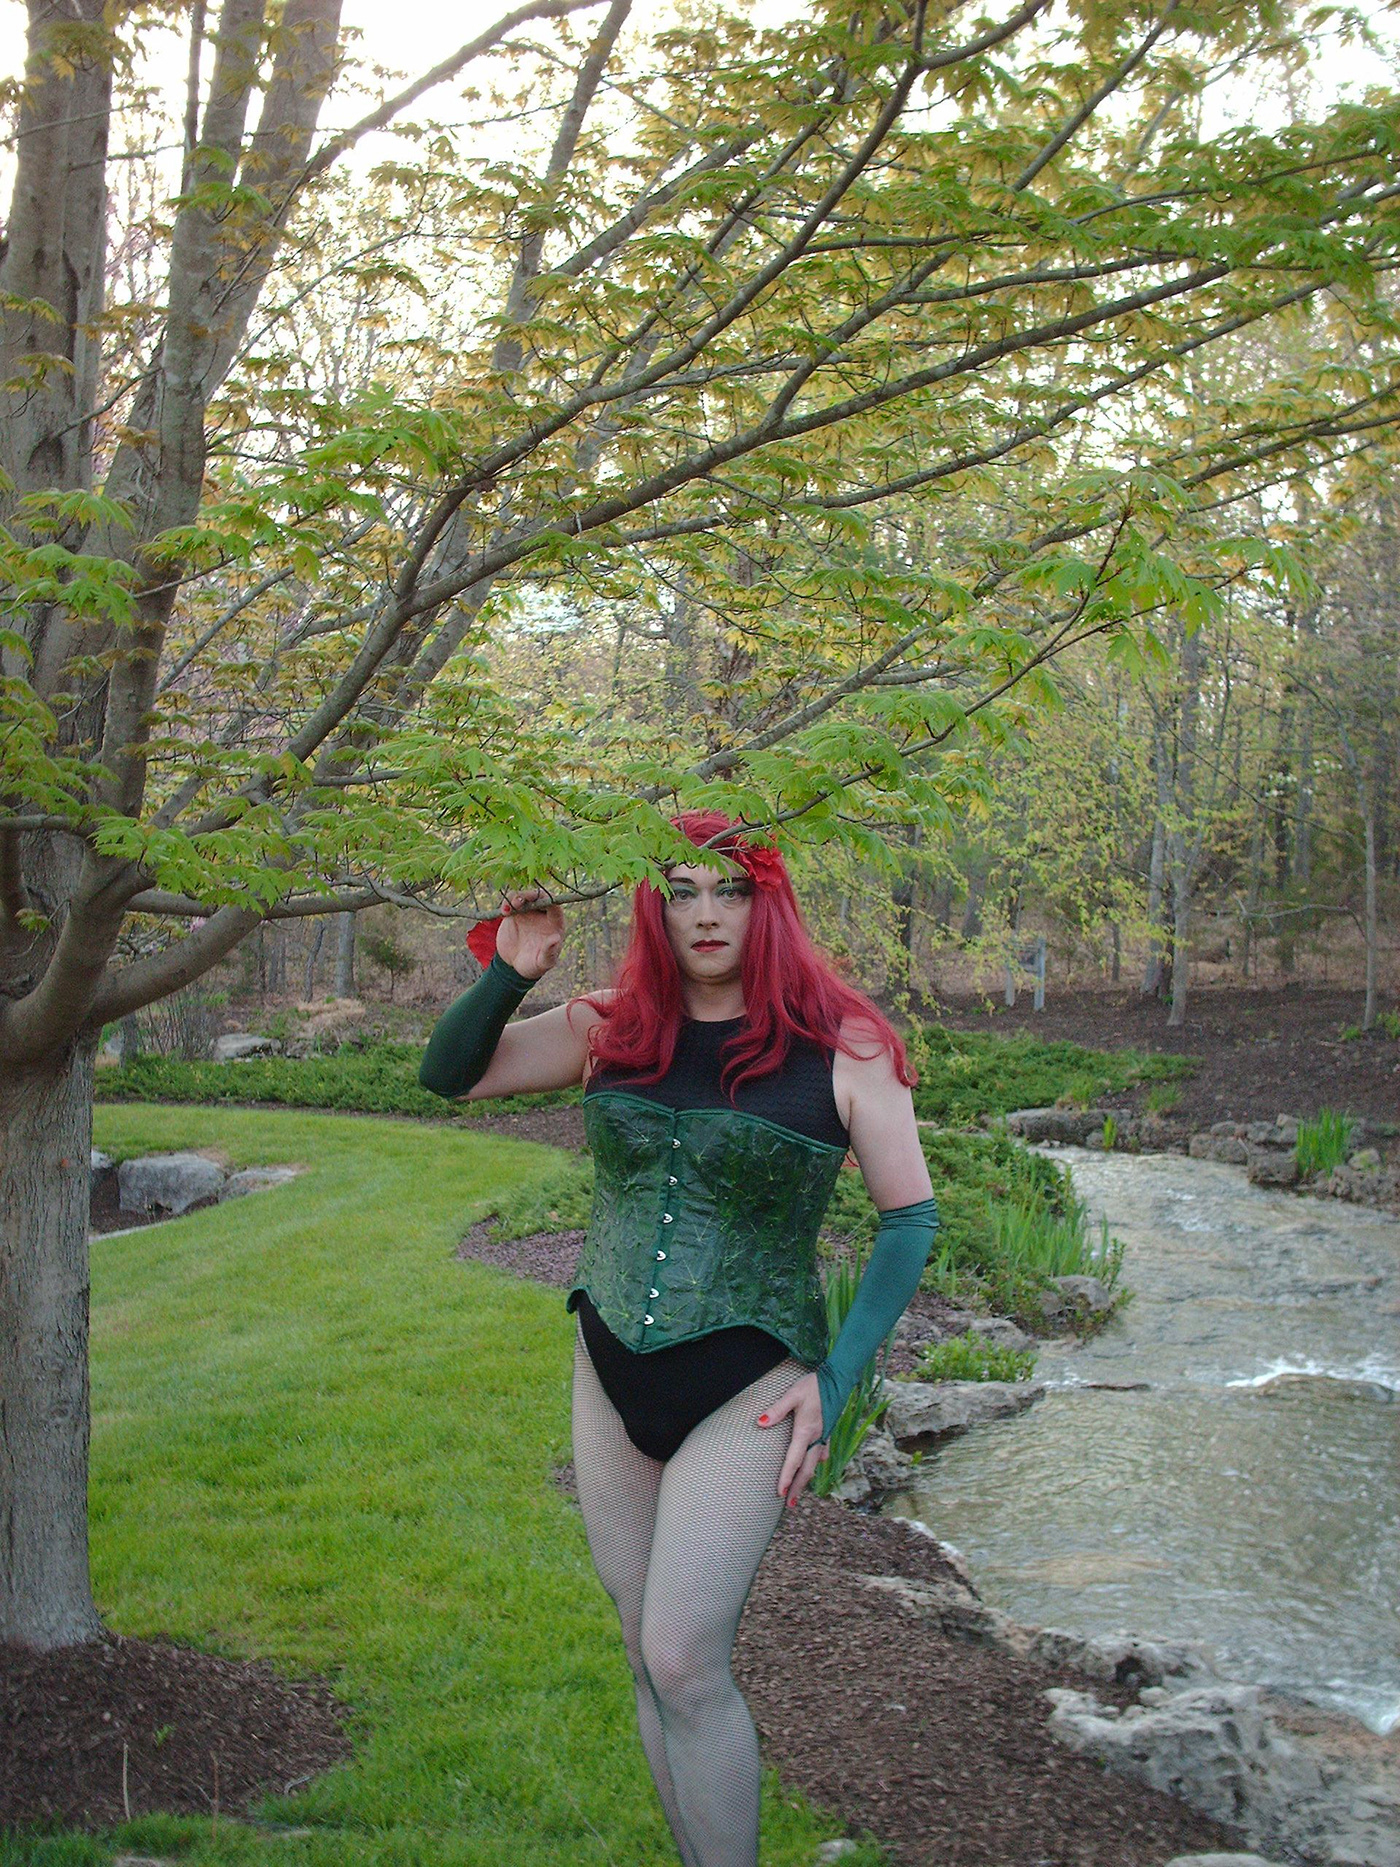 Cosplay crossplay poison ivy batman Dc Comics spring fishnets Park trees redheads